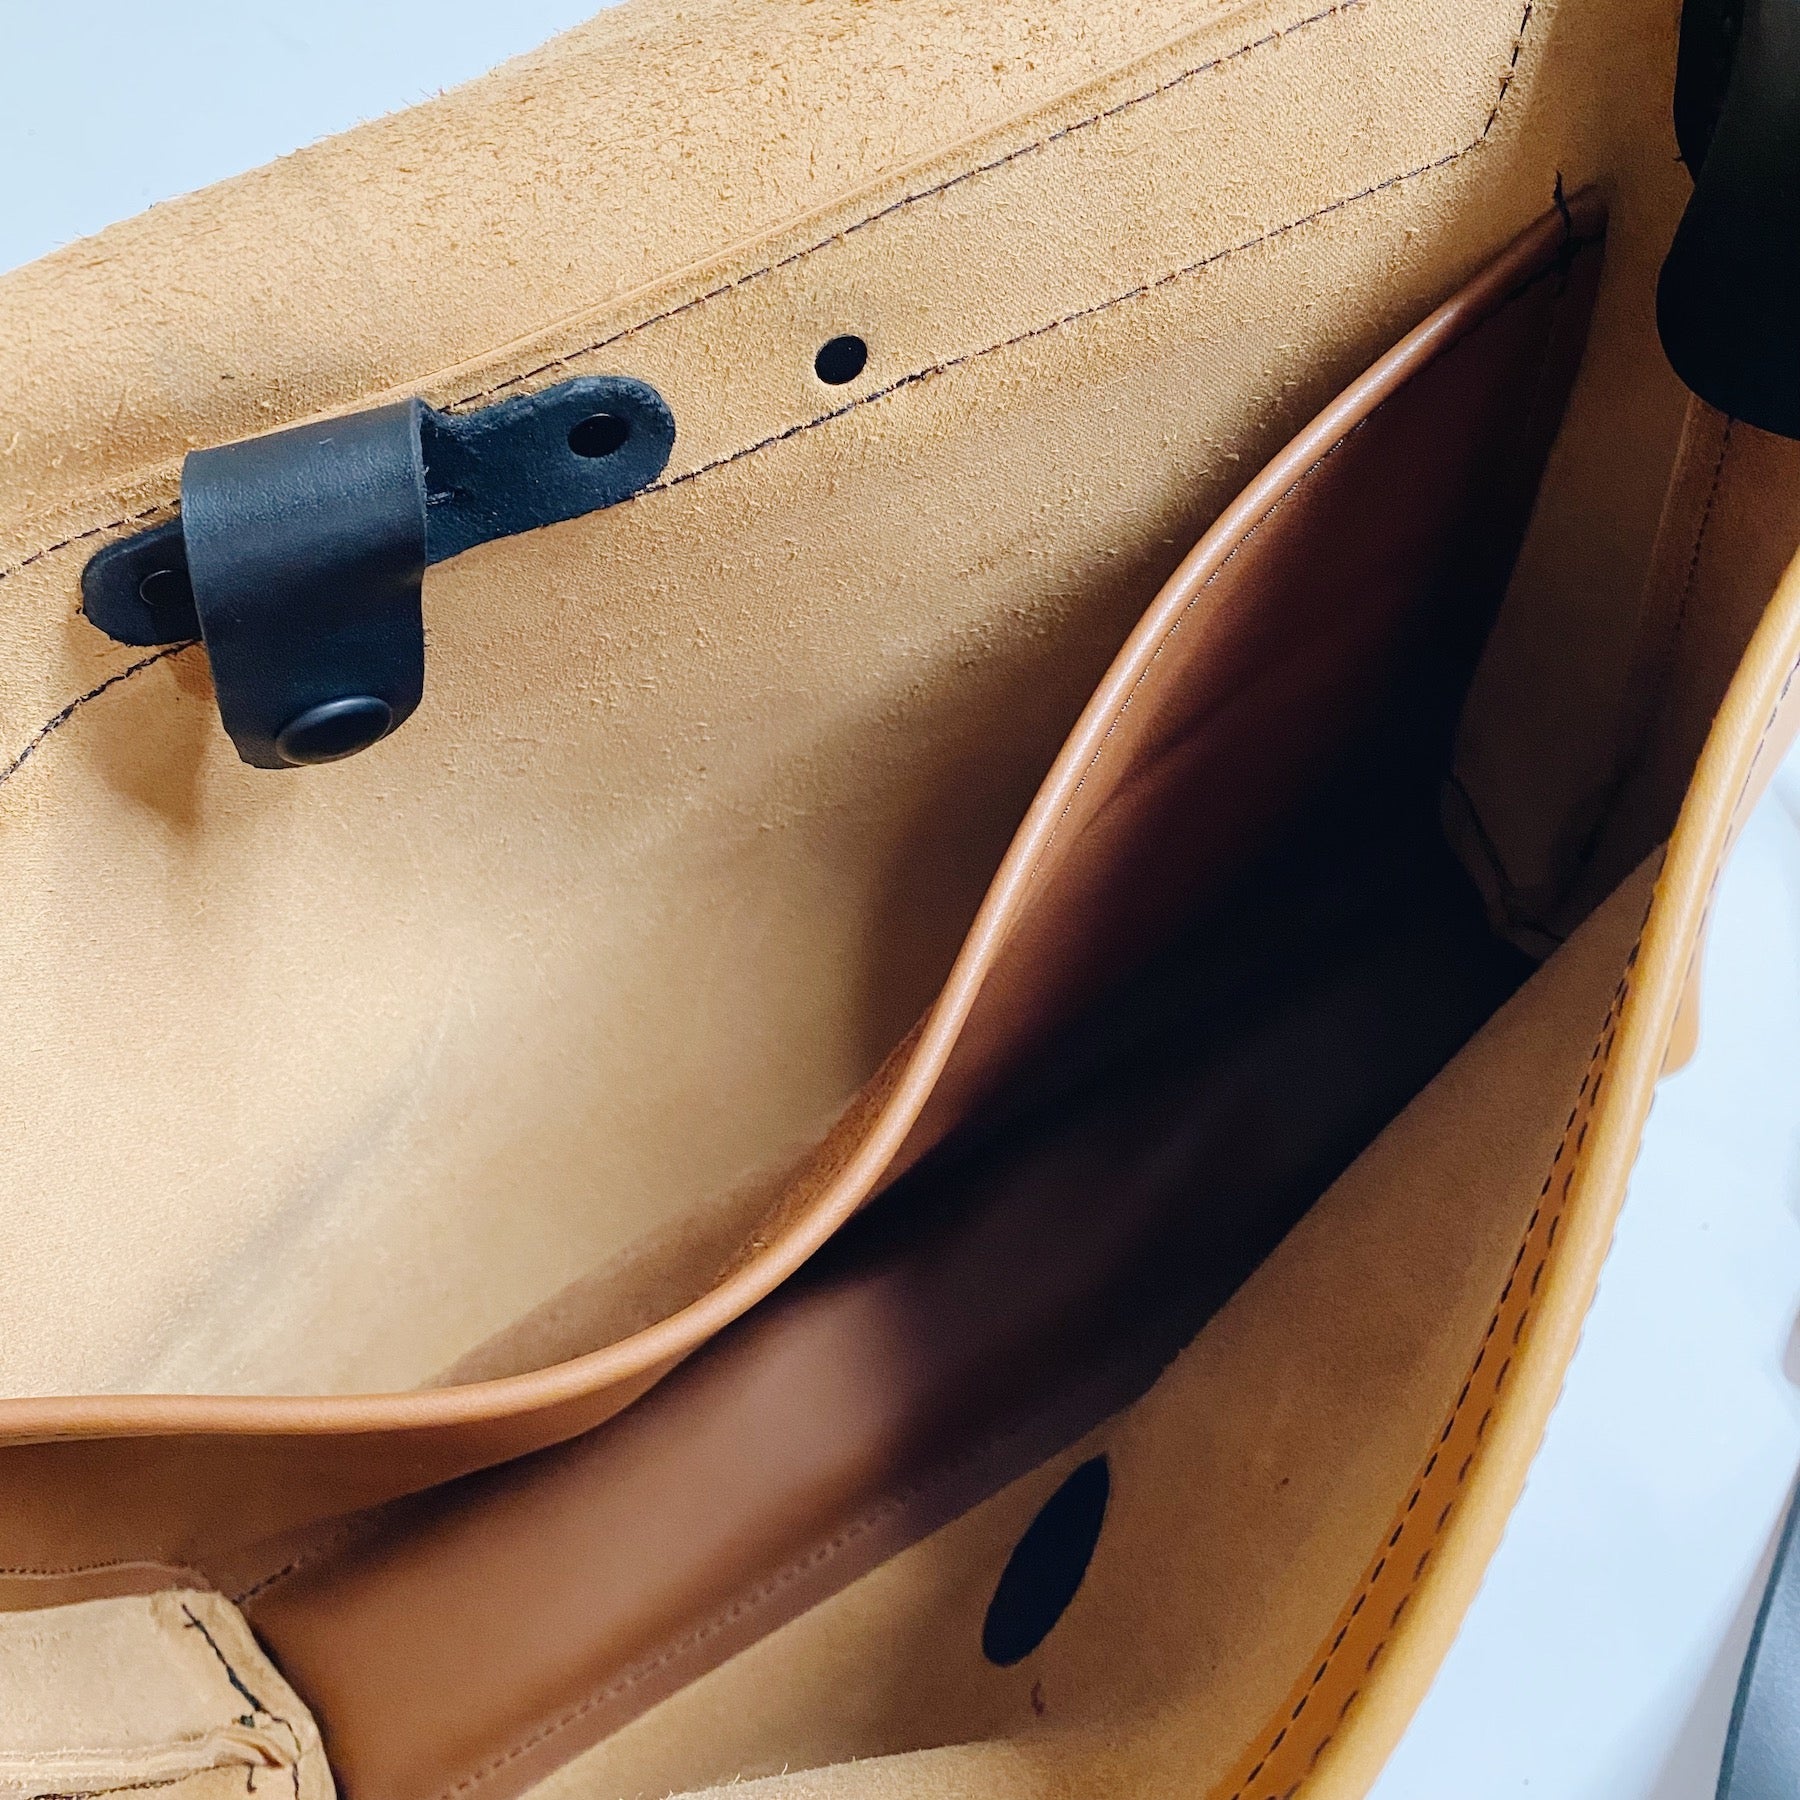 Oxford Leather Courier Bag